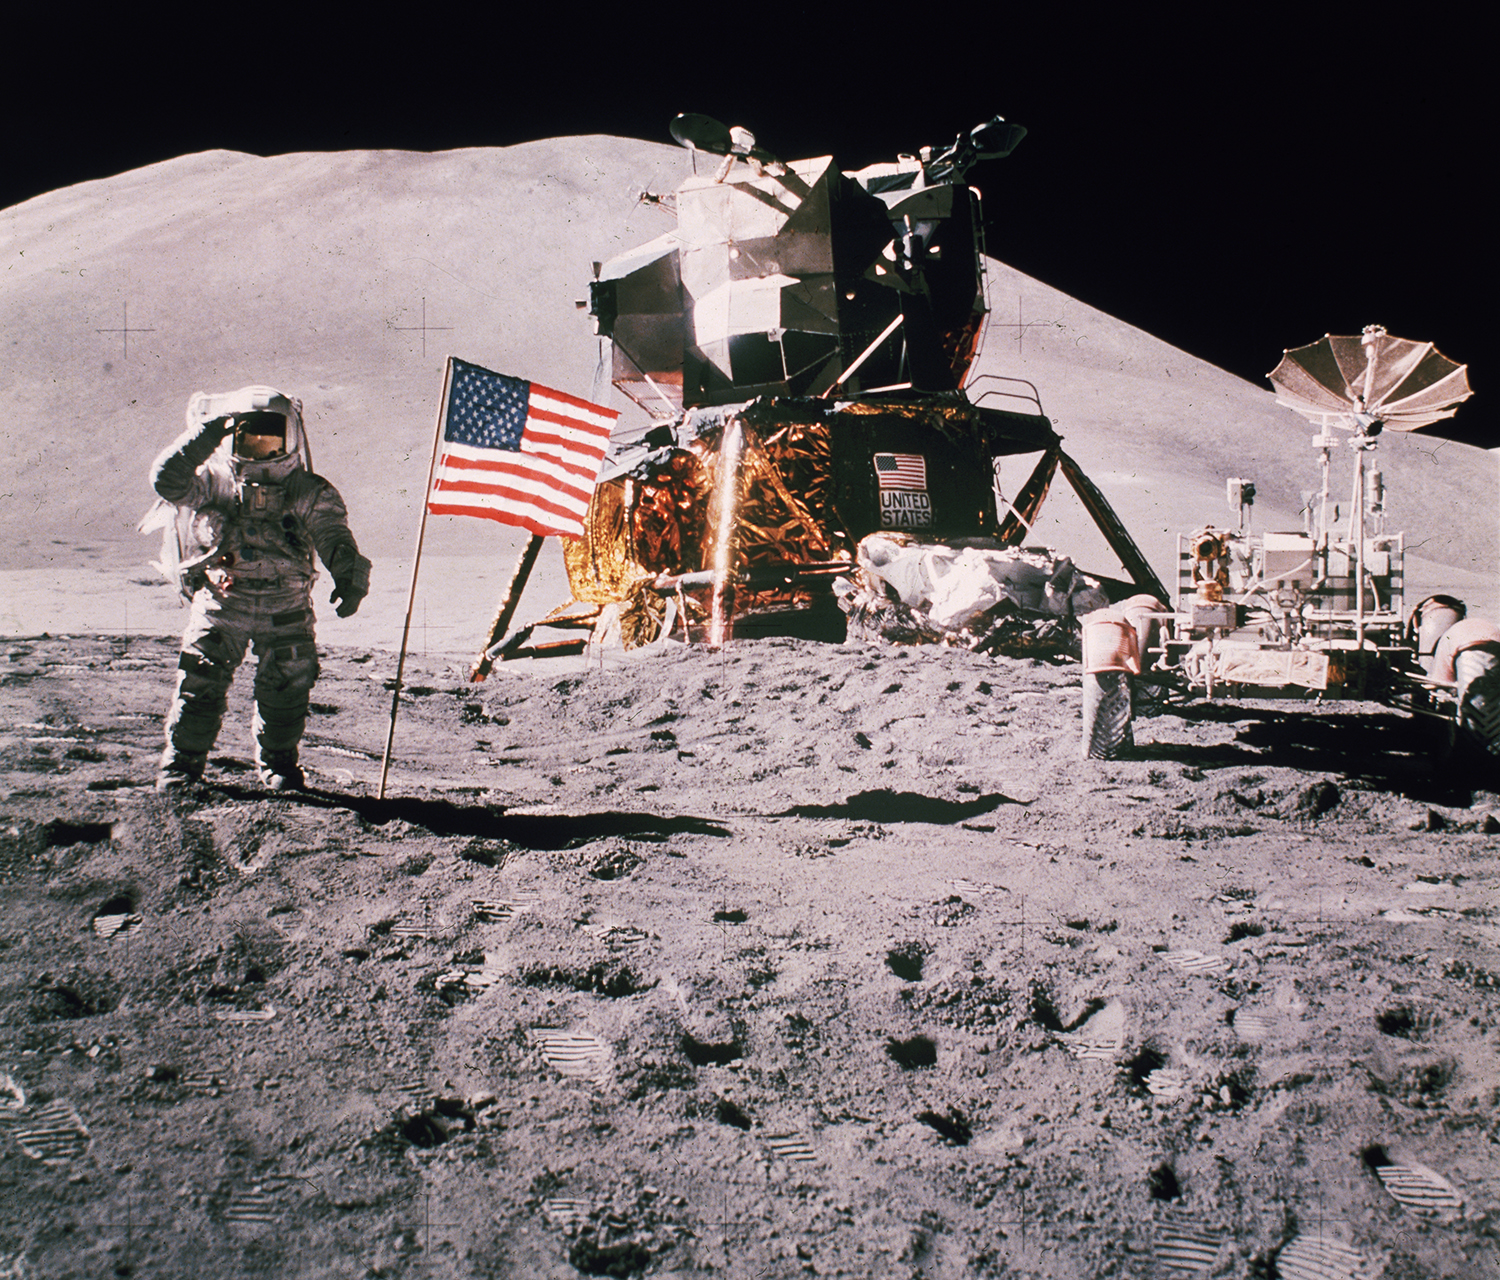 A 3D-printing company is preparing to build on the lunar surface. But  first, a moonshot at home